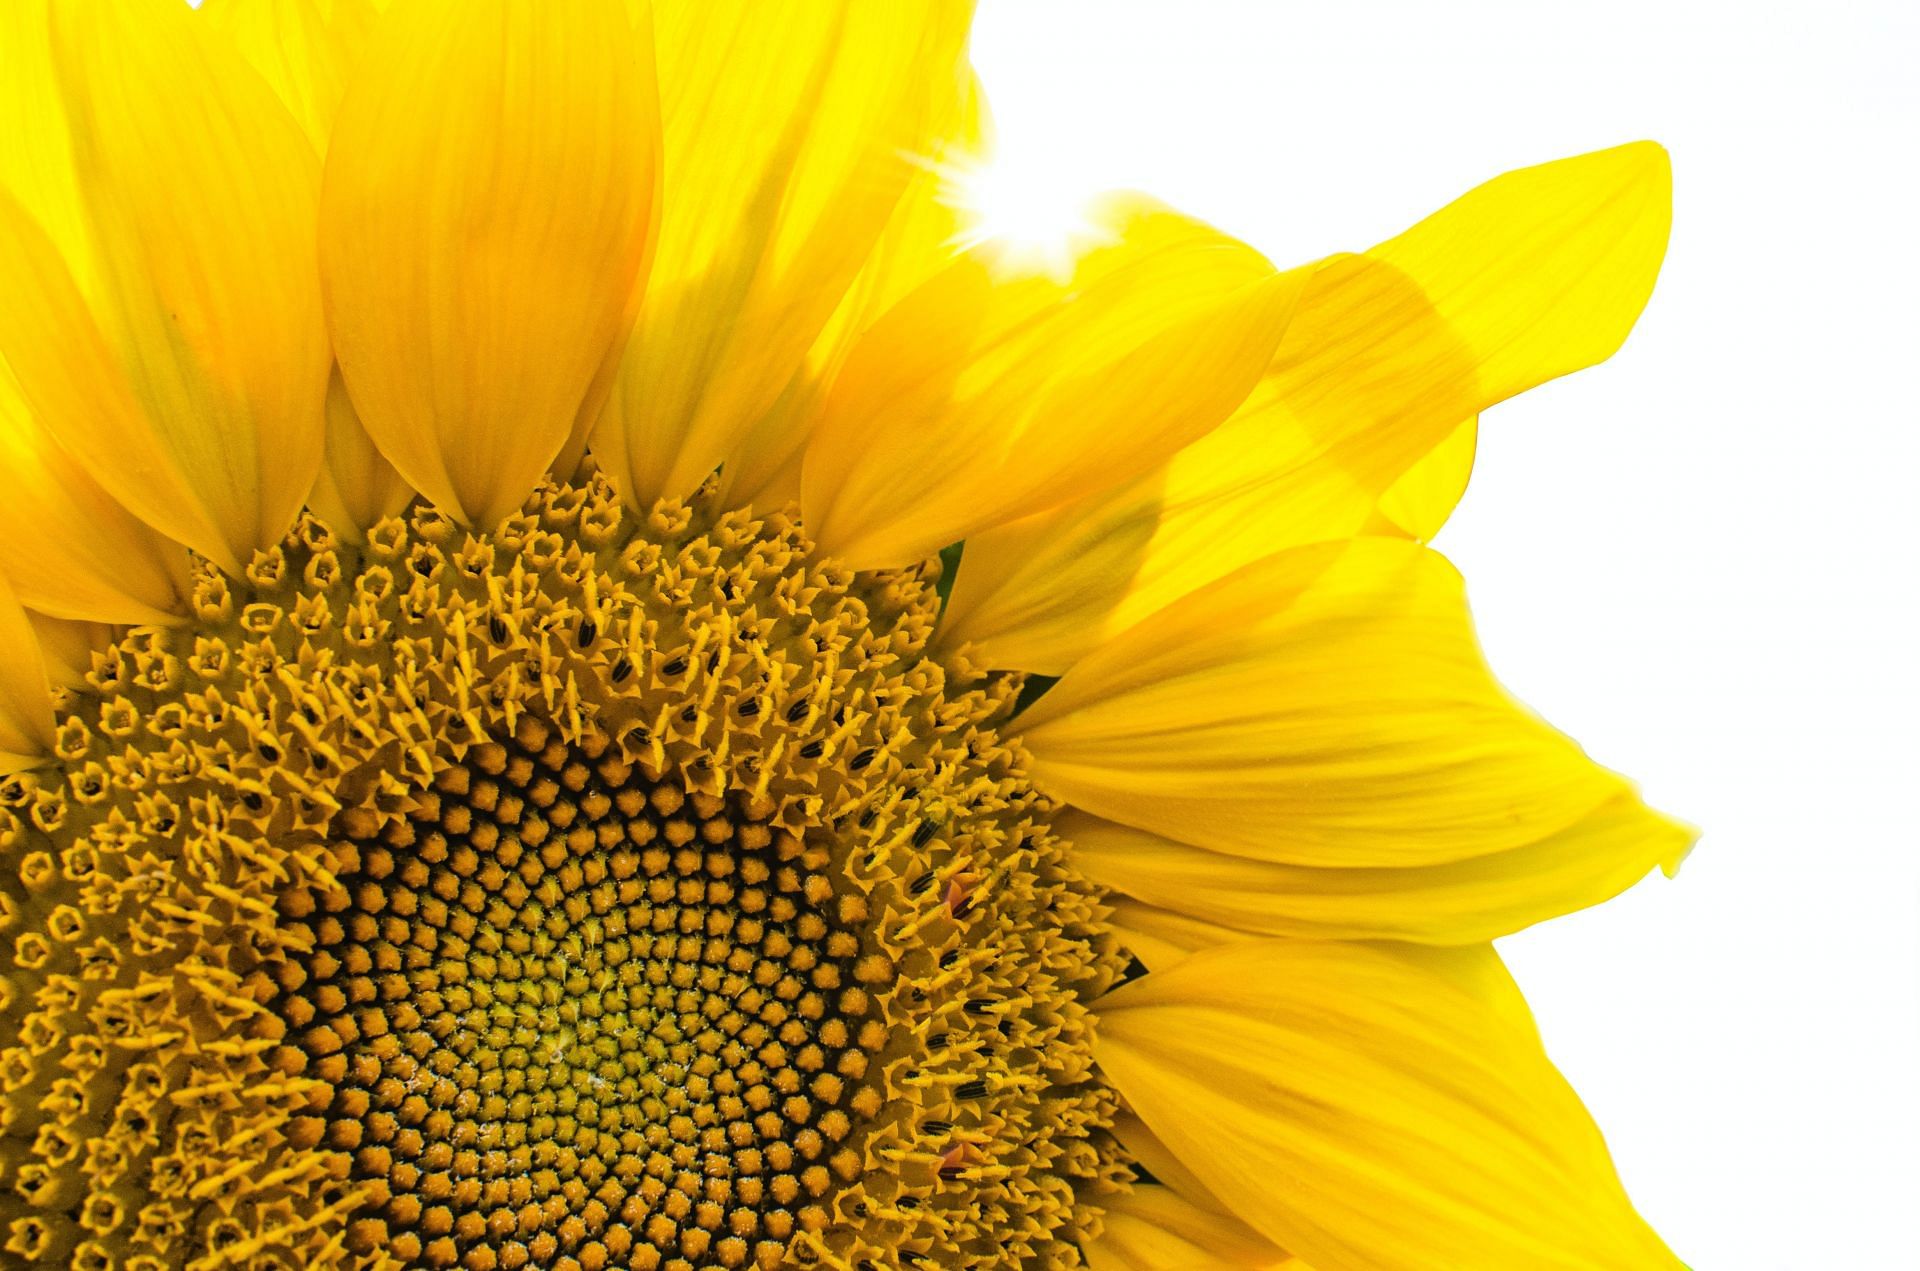 Sunflower seeds contain vitamin B1, essential for energy production (Image via pexels)